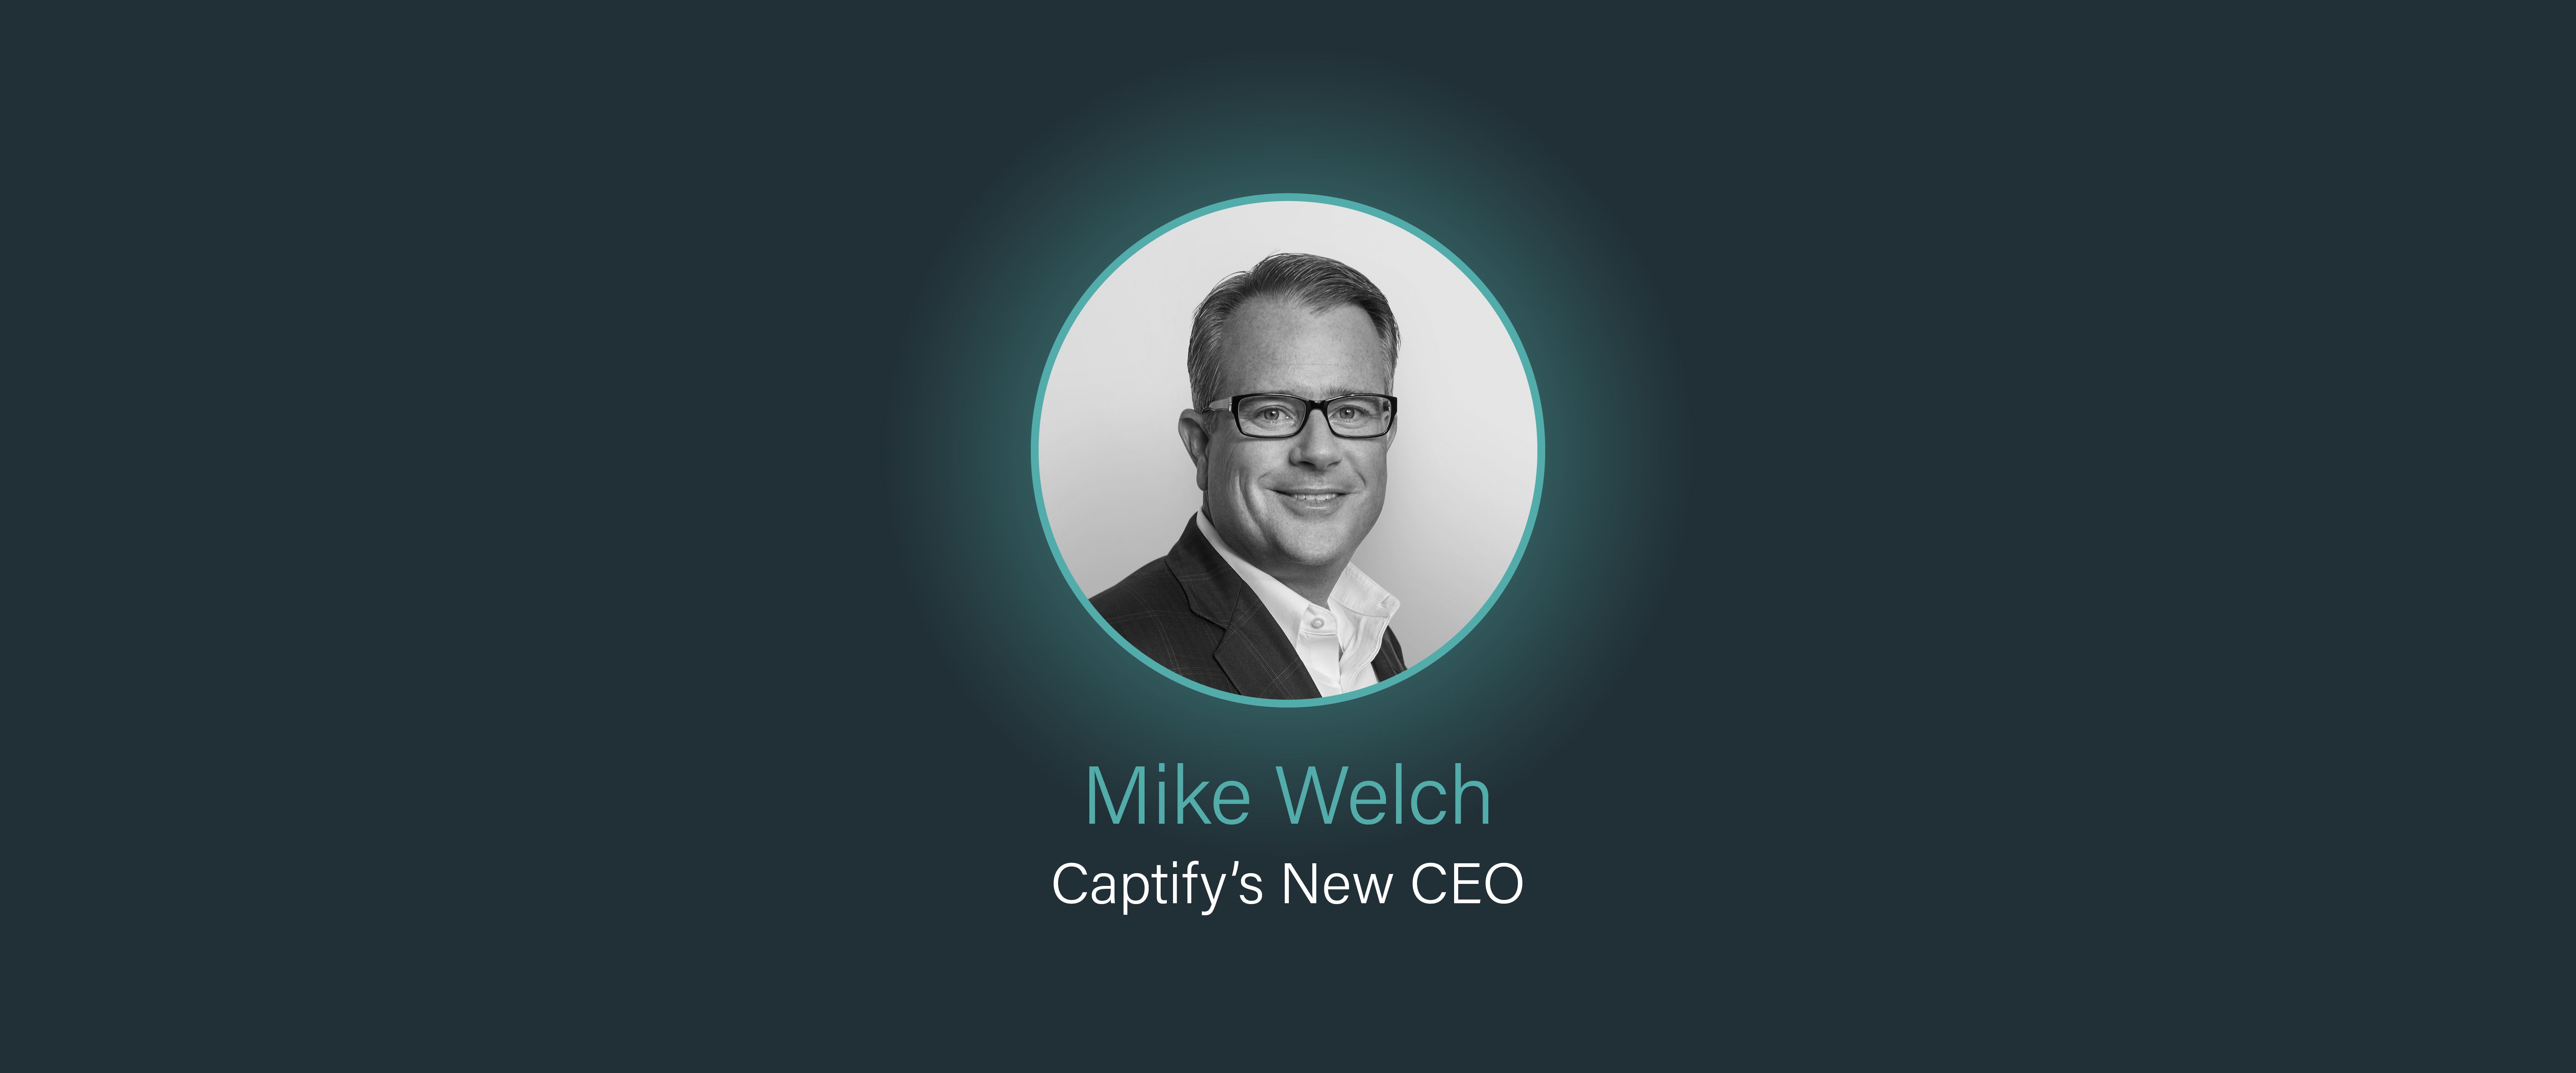 Mike Welch Named CEO of Captify